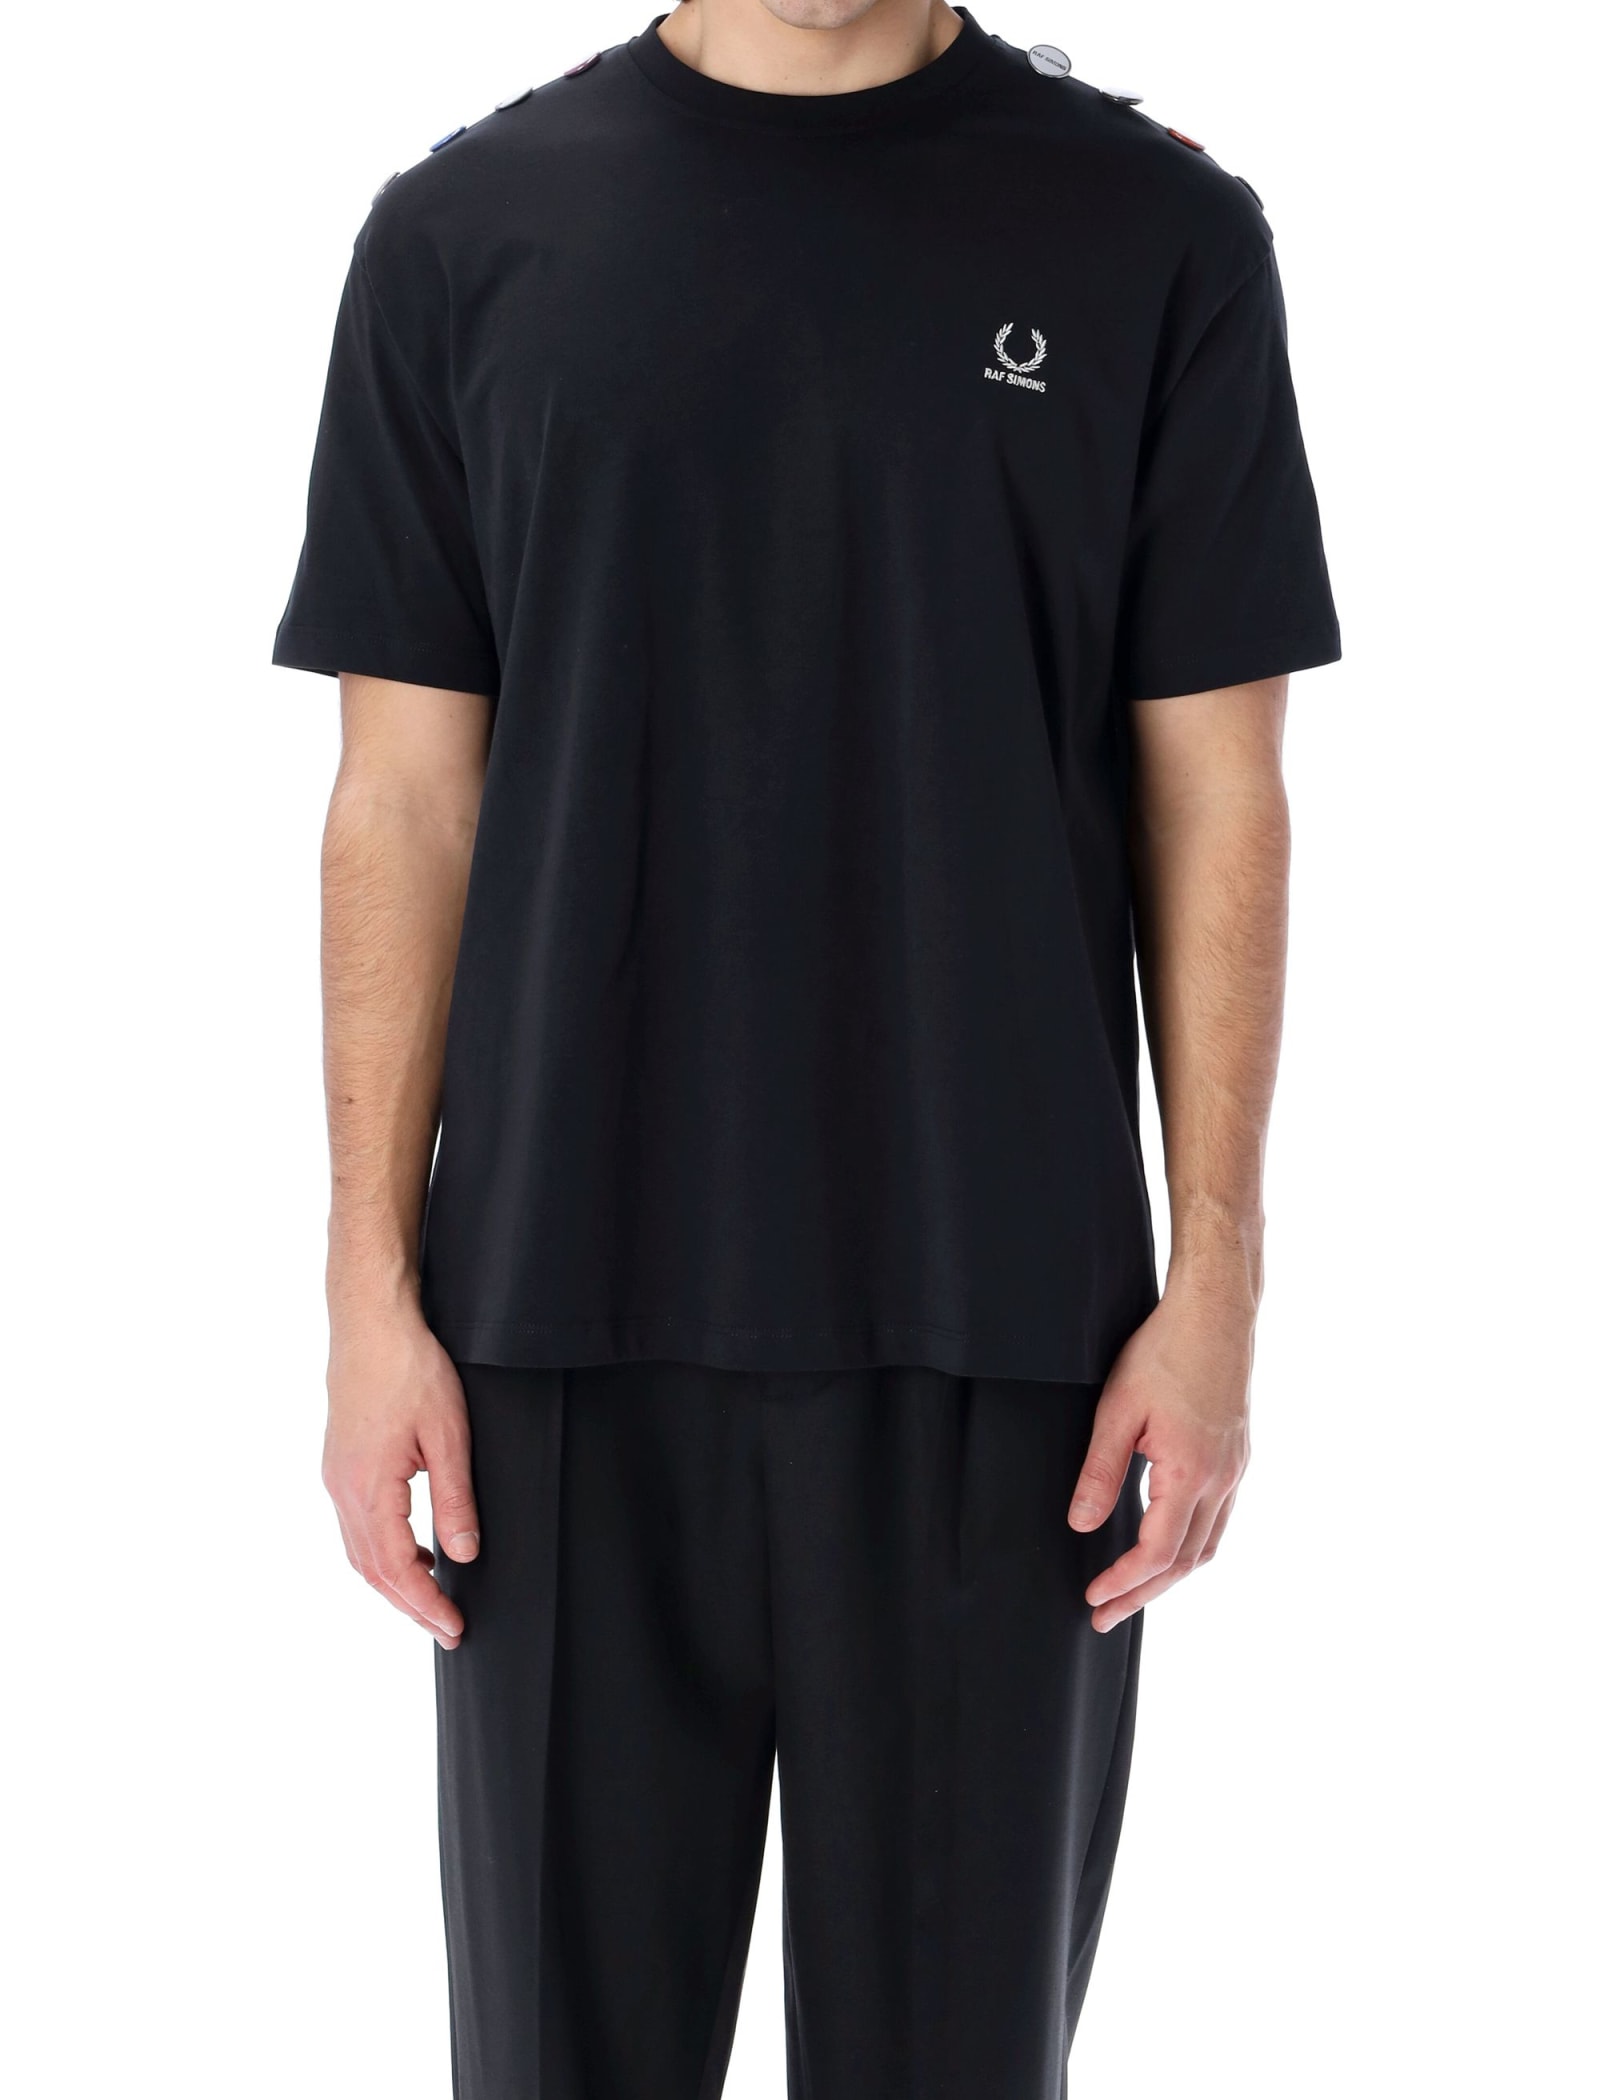 Fred Perry by Raf Simons Pins T-shirt